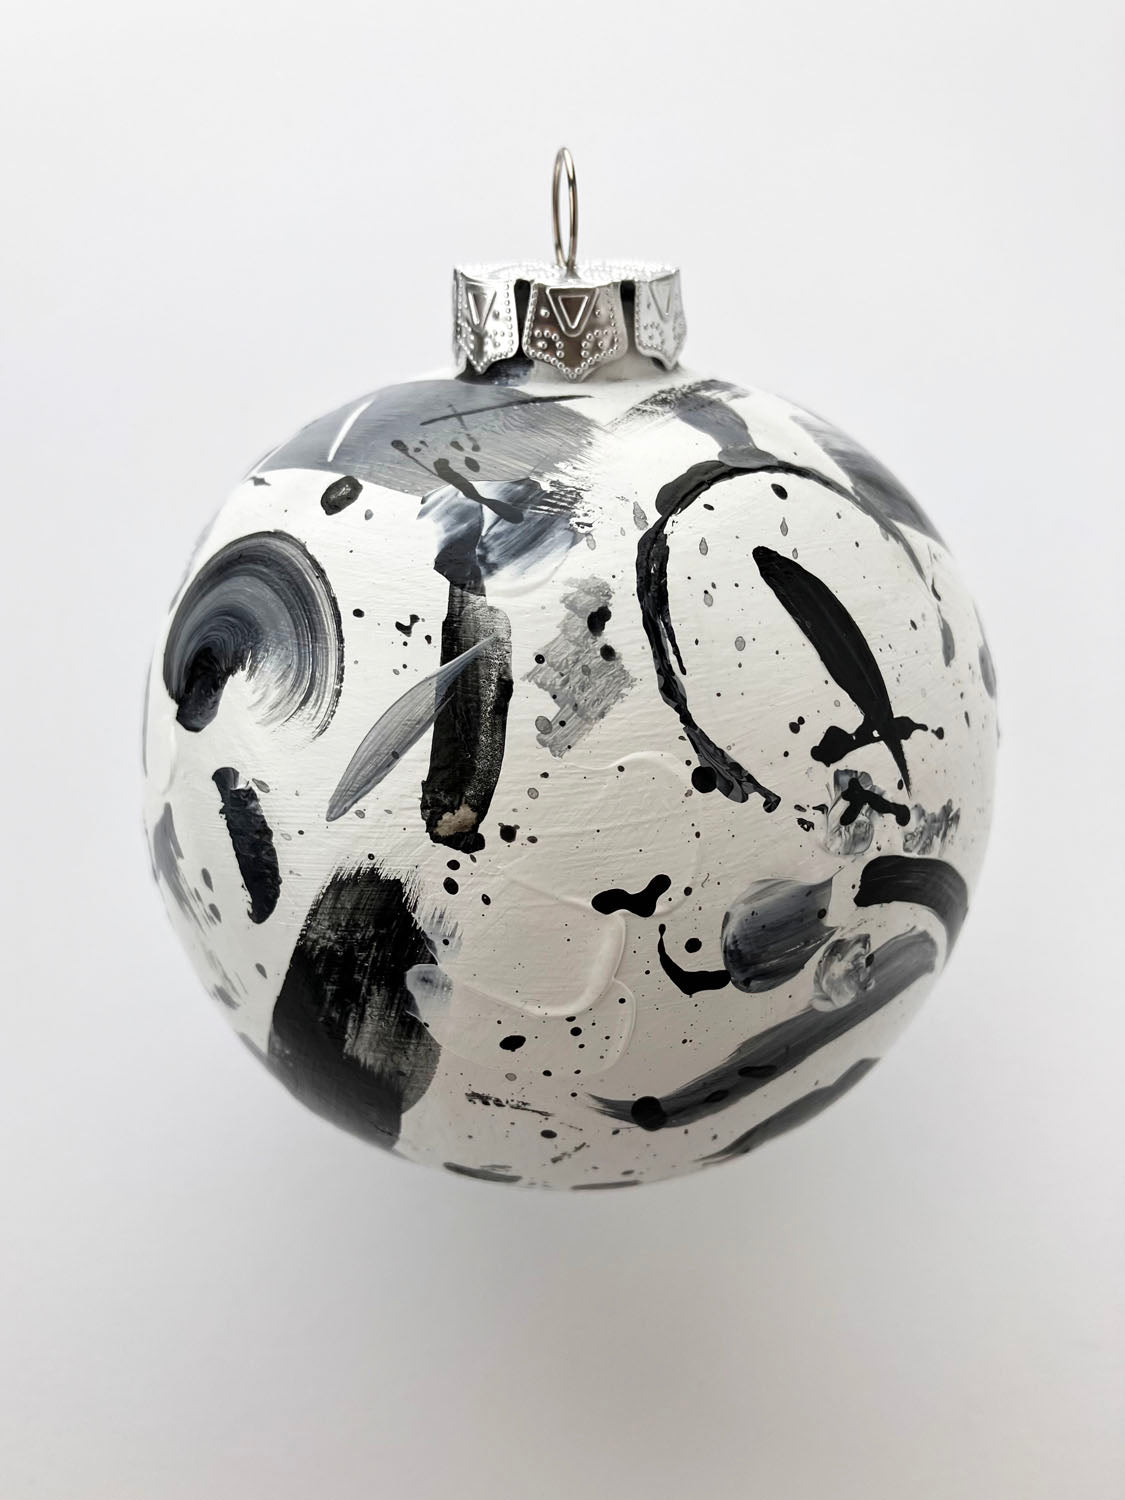 Hand Painted Ceramic Ornament #1 - Black & White Abstract, Round White Ornament